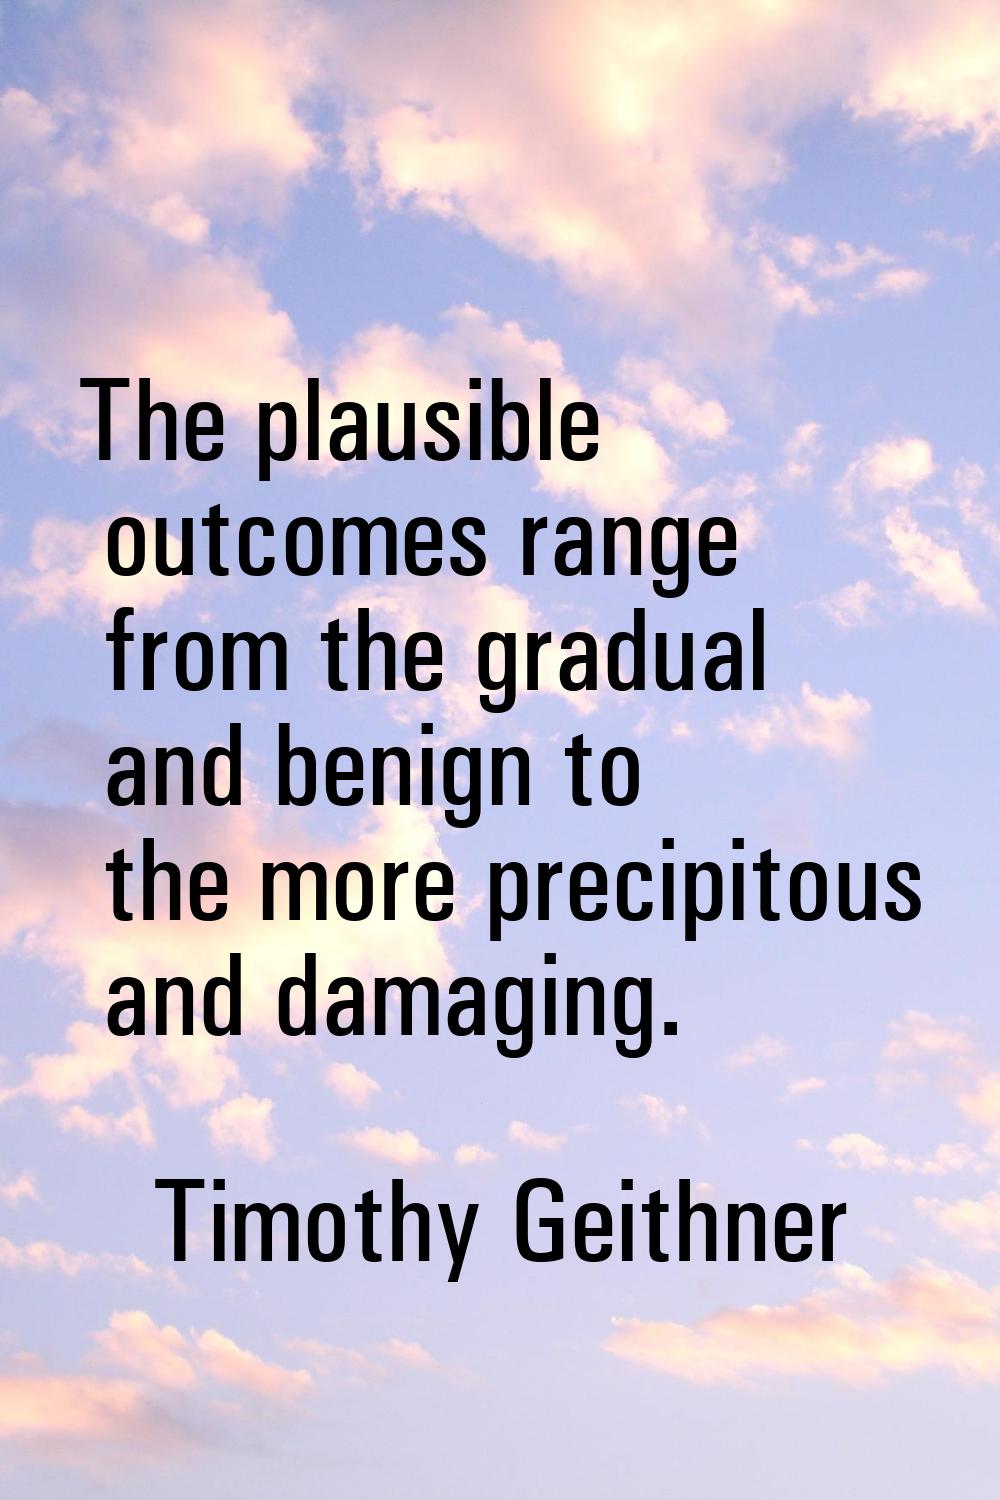 The plausible outcomes range from the gradual and benign to the more precipitous and damaging.